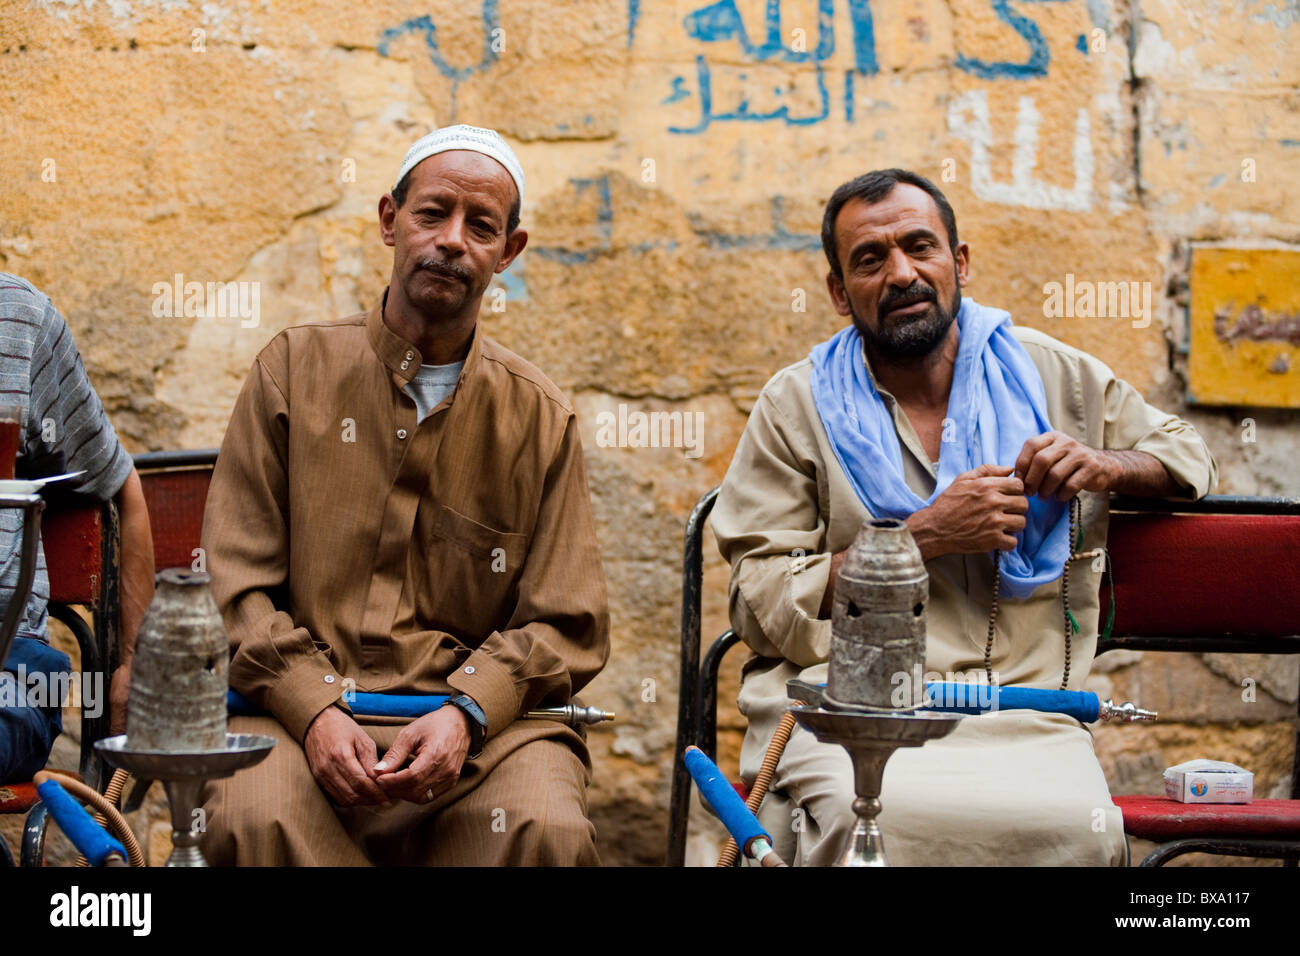 Two Egyptian men enjoying smoking shisha at a traditional outdoor street cafe in daily life of Islamic Cairo Stock Photo